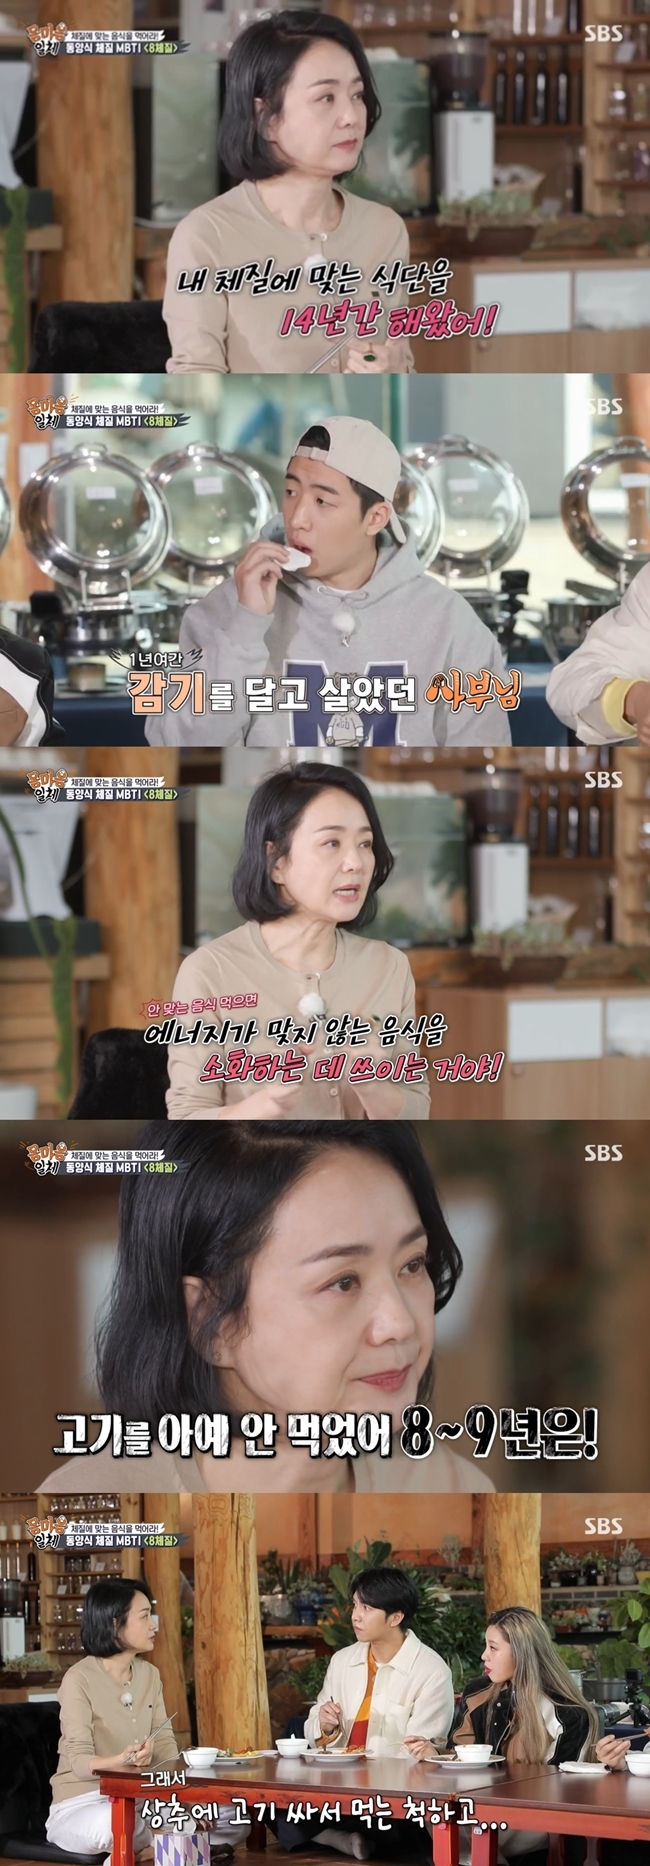 Actor Bae Jong-ok has revealed he has been maintaining a Vegetarian Society-oriented diet for 14 years.On March 20th, SBS All The Butlers, Bae Jong-ok appeared as a master.Bae Jong-ok, who invited the members to Yangpyeong on the day, said, It is already five years old. I live in this neighborhood and enjoy blue things.Bae Jong-ok prepared several foods, and the members contained meat-based foods, while Bae Jong-ok enjoyed a vegetable-oriented diet.Im trying to eat the right food for me, he said of the eight constitution.Its an MBTI of the East, Bae Jong-ok said of the eight constitutions, I had a diet that fits my constitution for 14 years. I continued to have Flu for a year before I started.My friend told me to go to the eight constitution, I was diagnosed with constitution and ate only rice and fish. miraculously, Flu fell in two days. I feel my body droop and sleepy when I eat meat. My energy is used to digest if the food is not right. So I did not eat meat for 8-9 years.Im eating a little bit of (meat) because I have a problem with protein, he said.Lee Seung-gi, who heard this, was surprised that all of the dramas were eaten at the old drama party, and Bae Jong-ok recalled, I pretended to eat (meat) with lettuce.